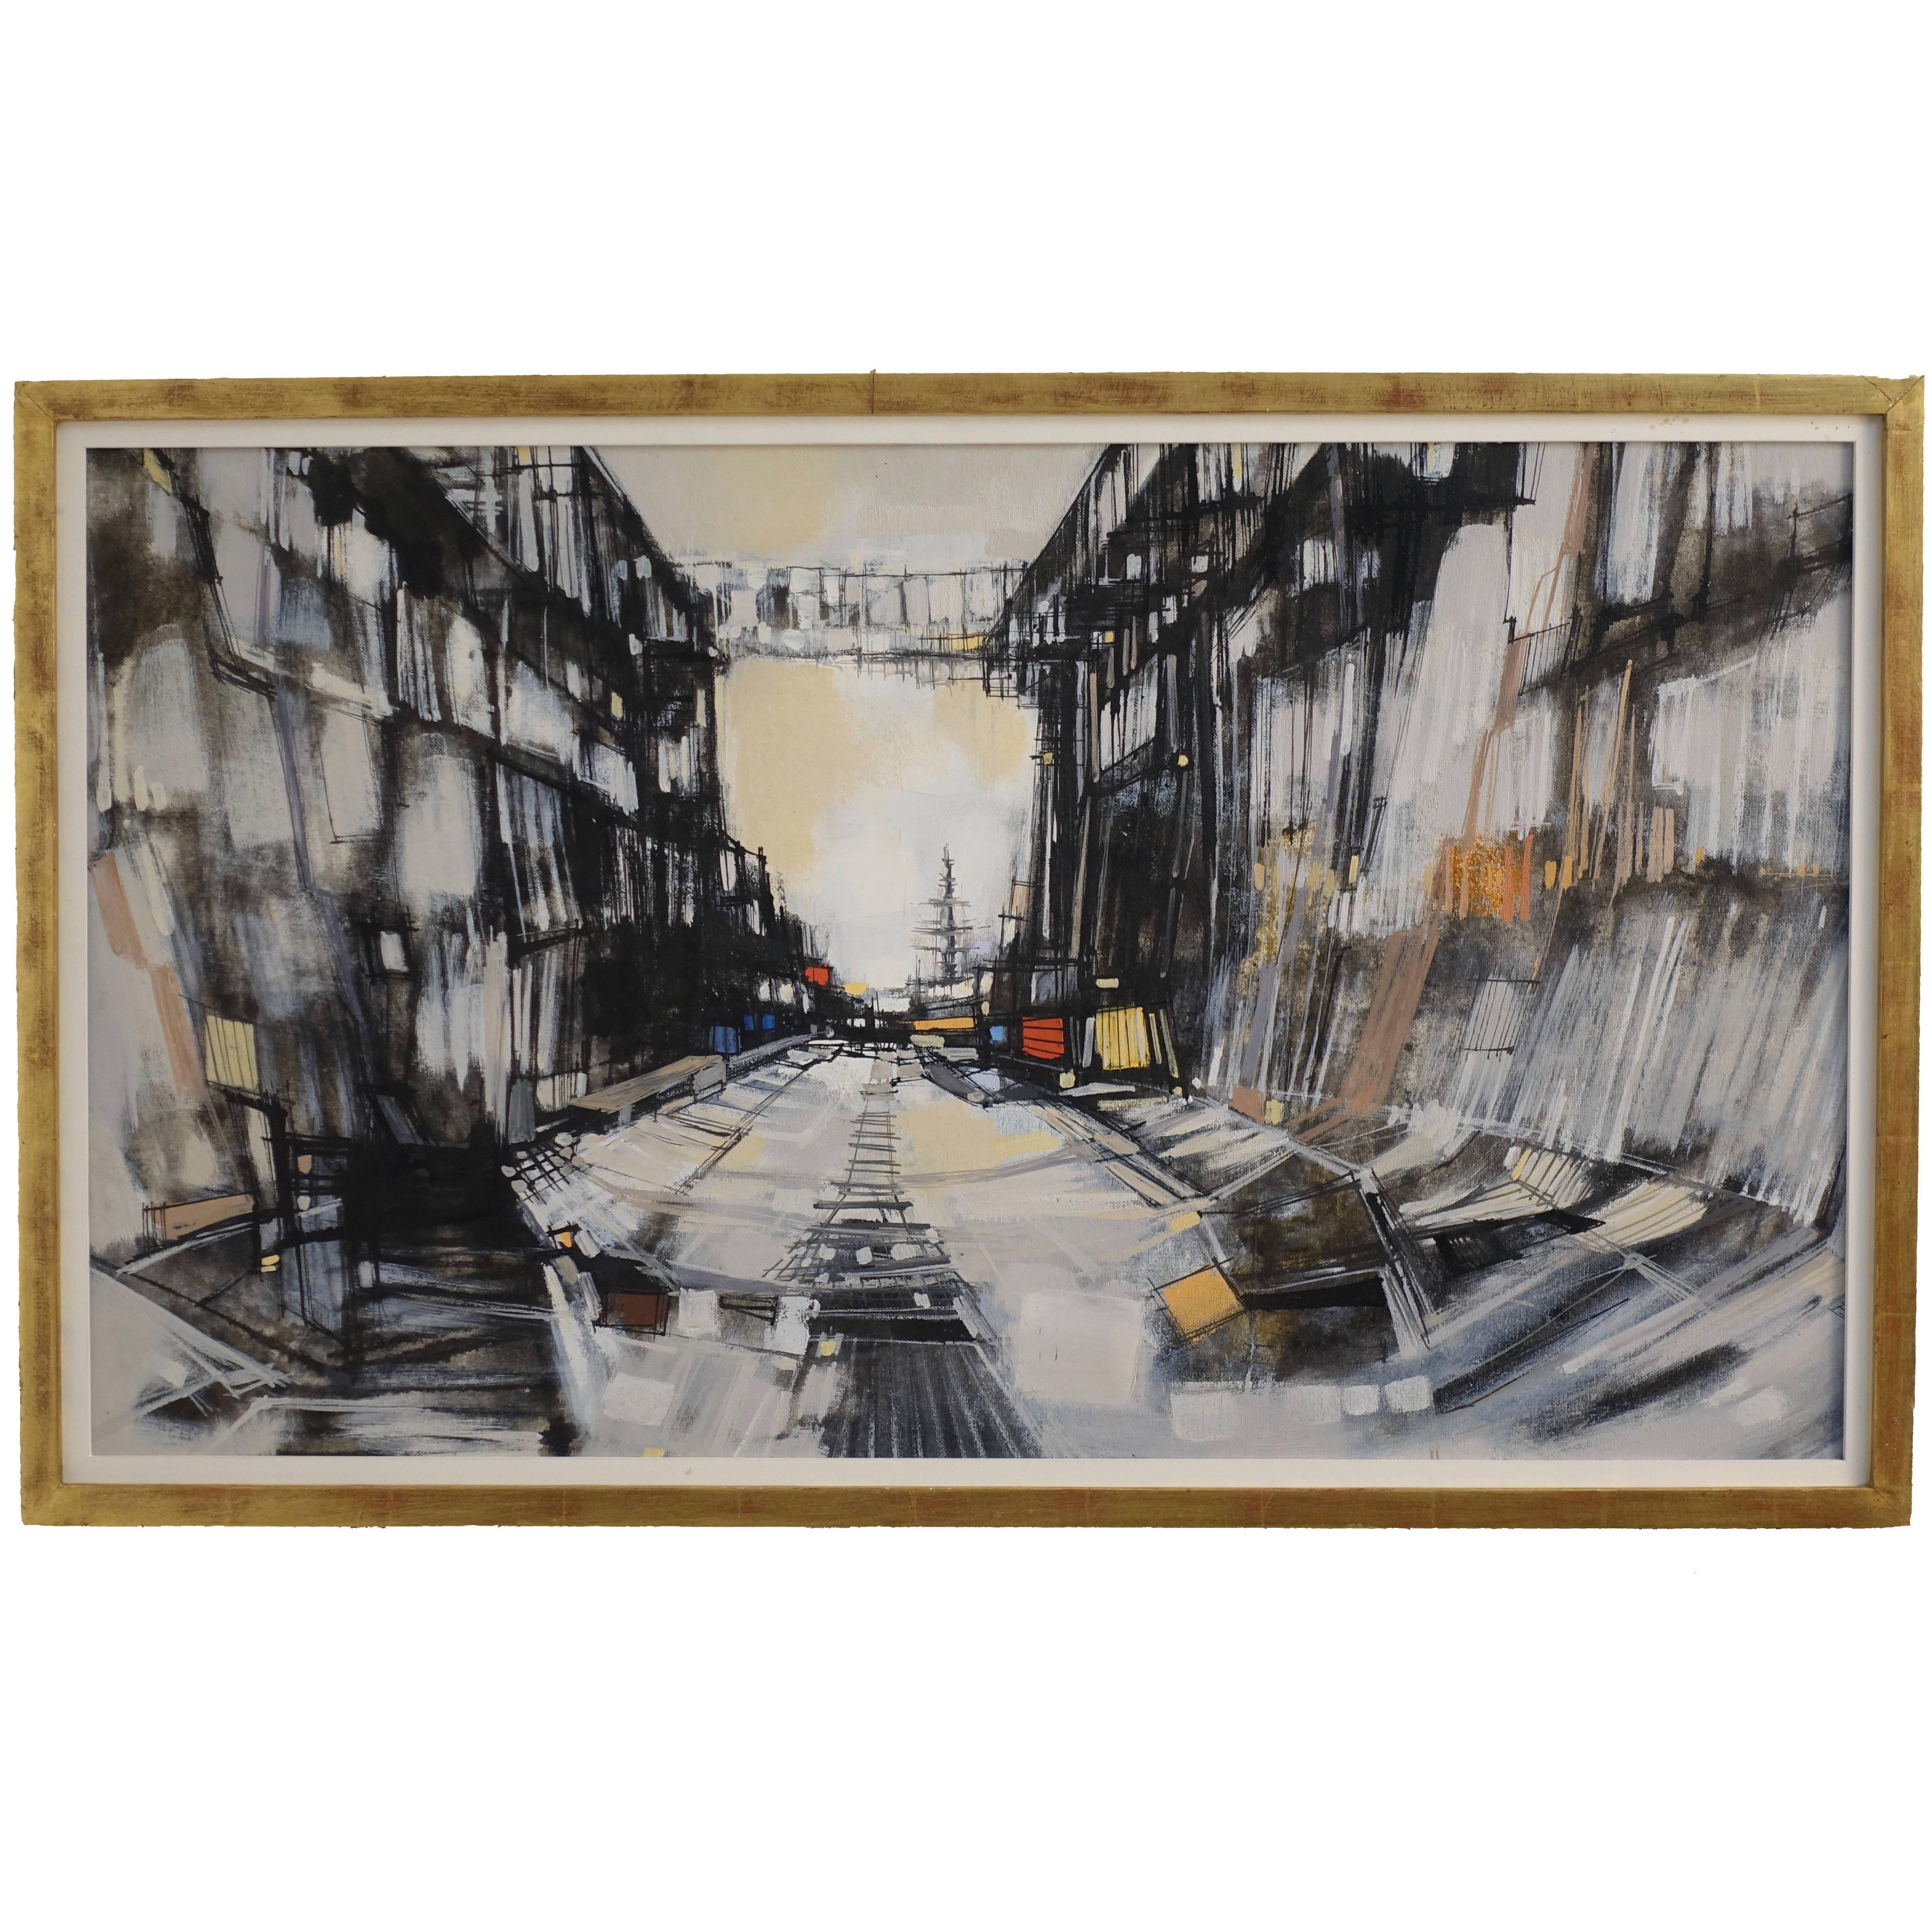 Abstract Cityscape Painting by Max Gunther, Europe Midcentury, 1960s